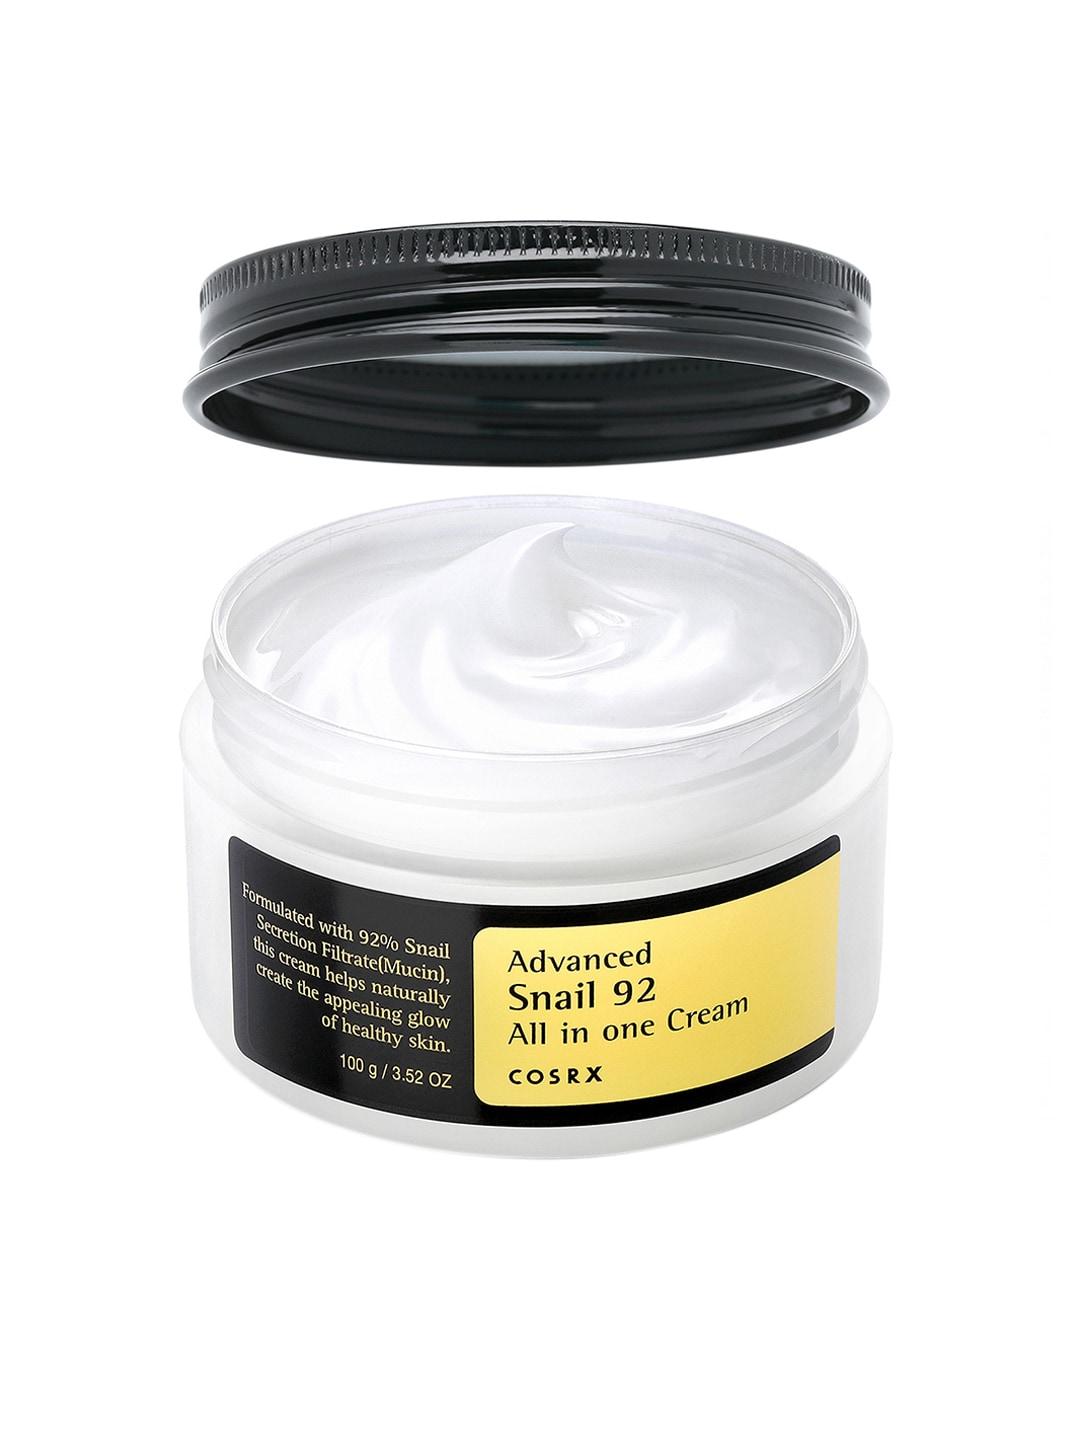 cosrx-advanced-snail-92-all-in-one-repair-cream-with-92%-snail-mucin-for-moisturizing-100g